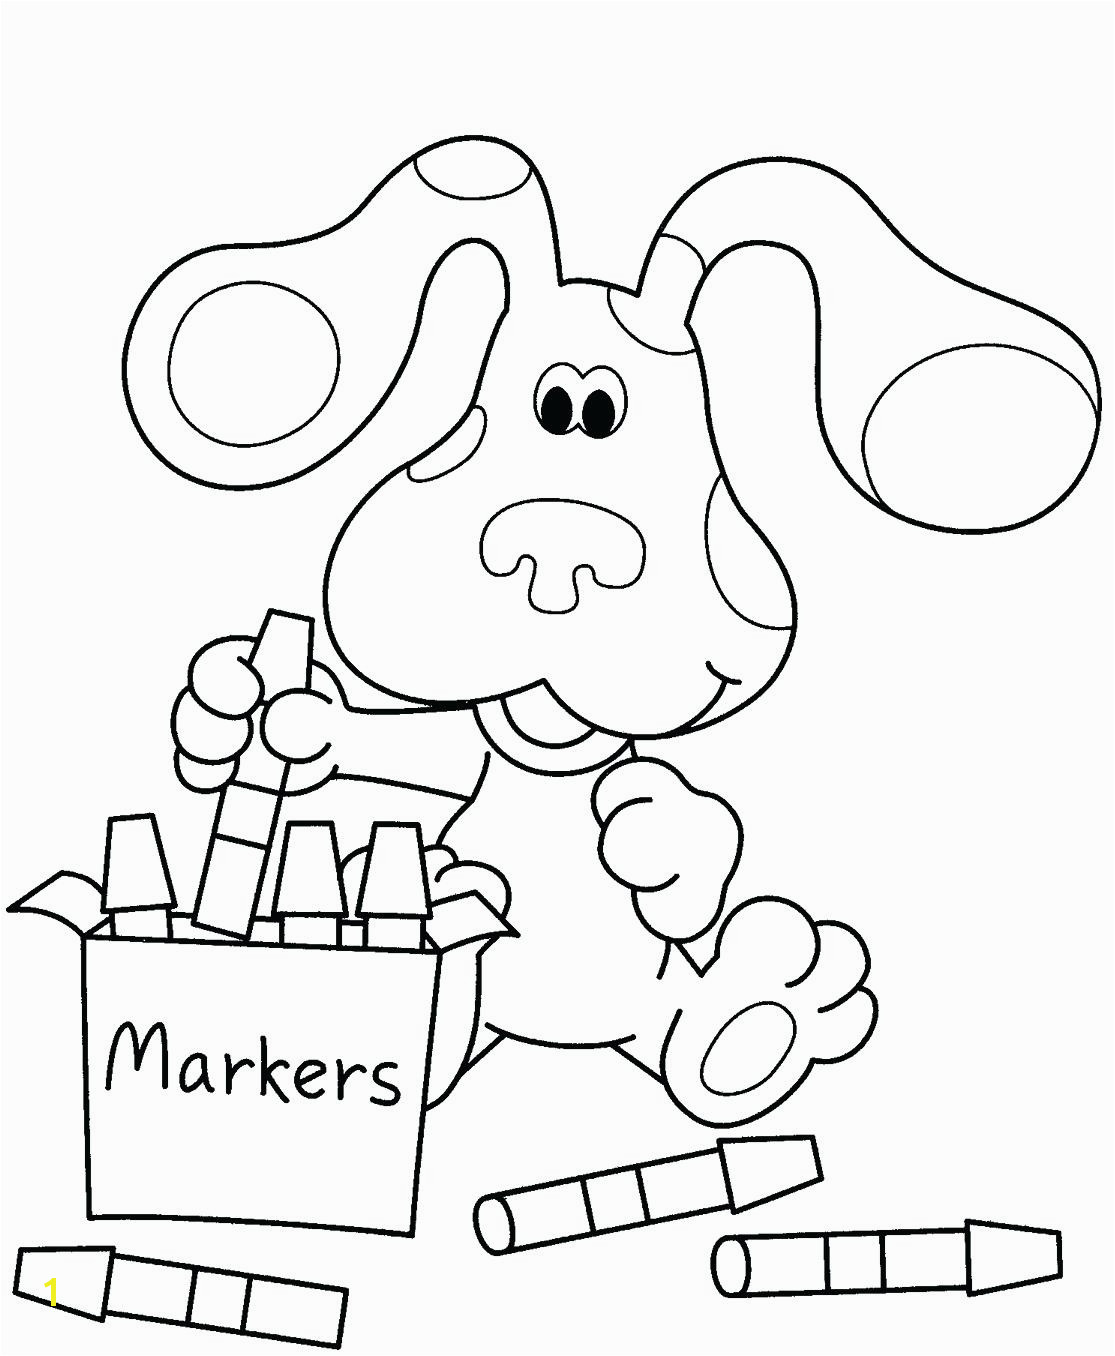 Awesome disney jr coloring pages Free 11 q Coloring Disney Junior Octonauts Pages Jr